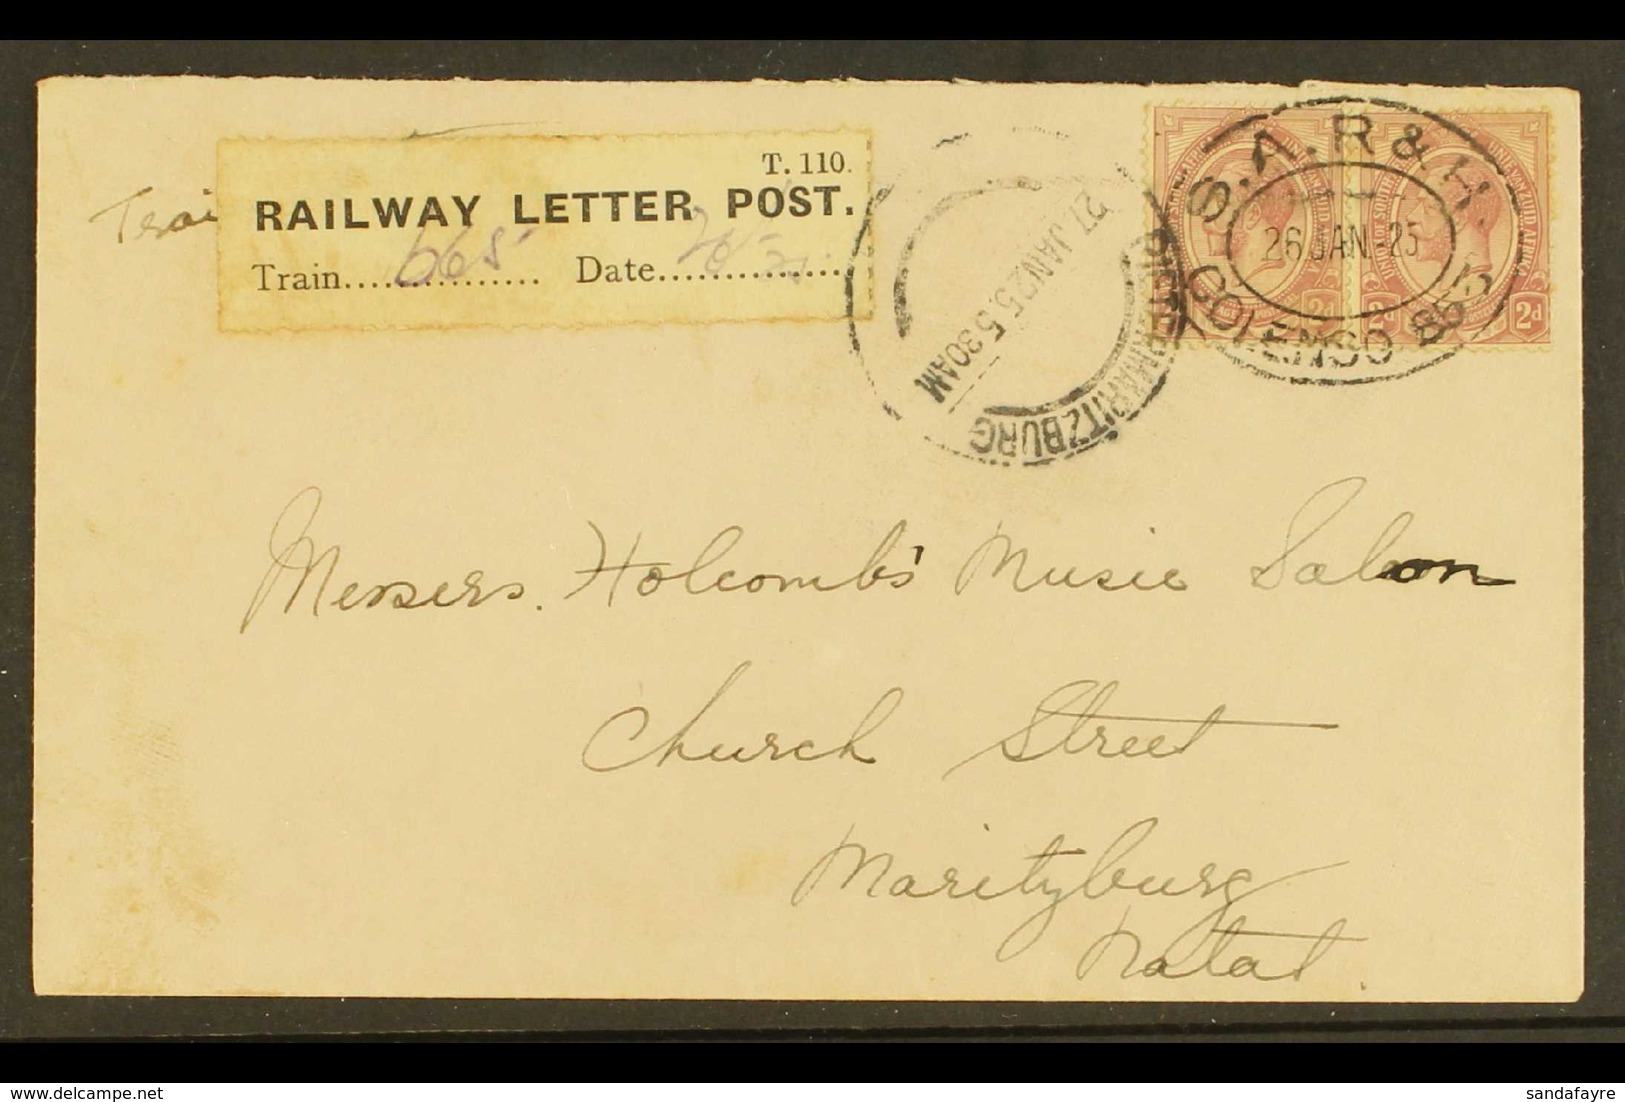 1925 RAILWAY LETTER POST COVER 2d KGV Pair On Cover, Cancelled With Oval "S.A.R. & H. COLENSO 853" 26.1.25 Postmark, "T. - Non Classificati